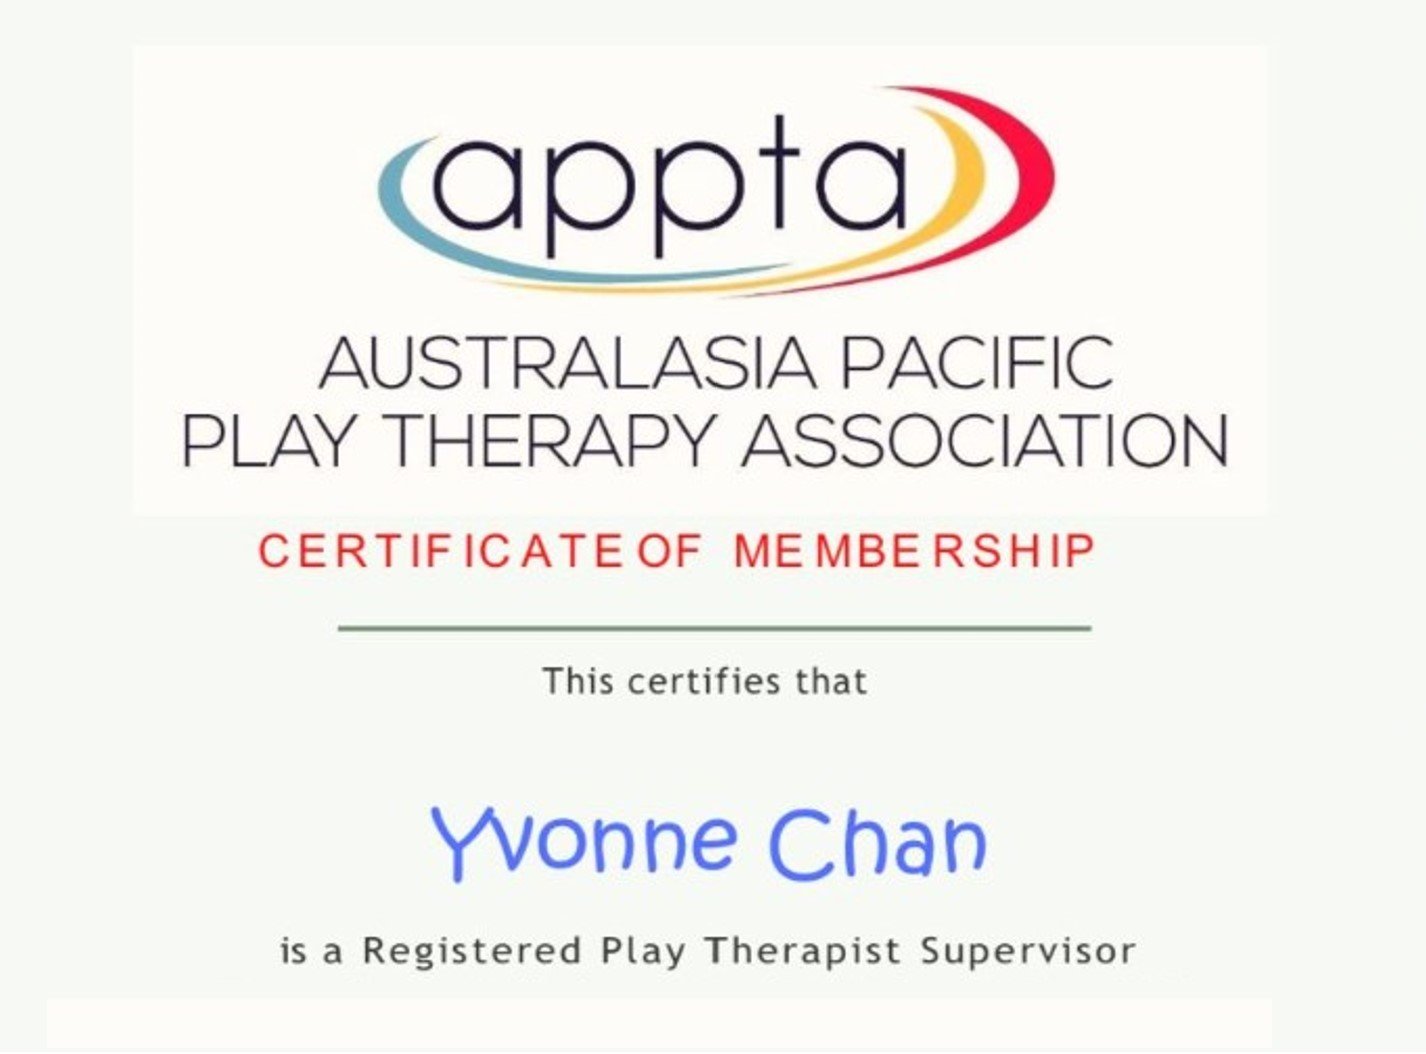 Congratulations to Ms Yvonne Chan